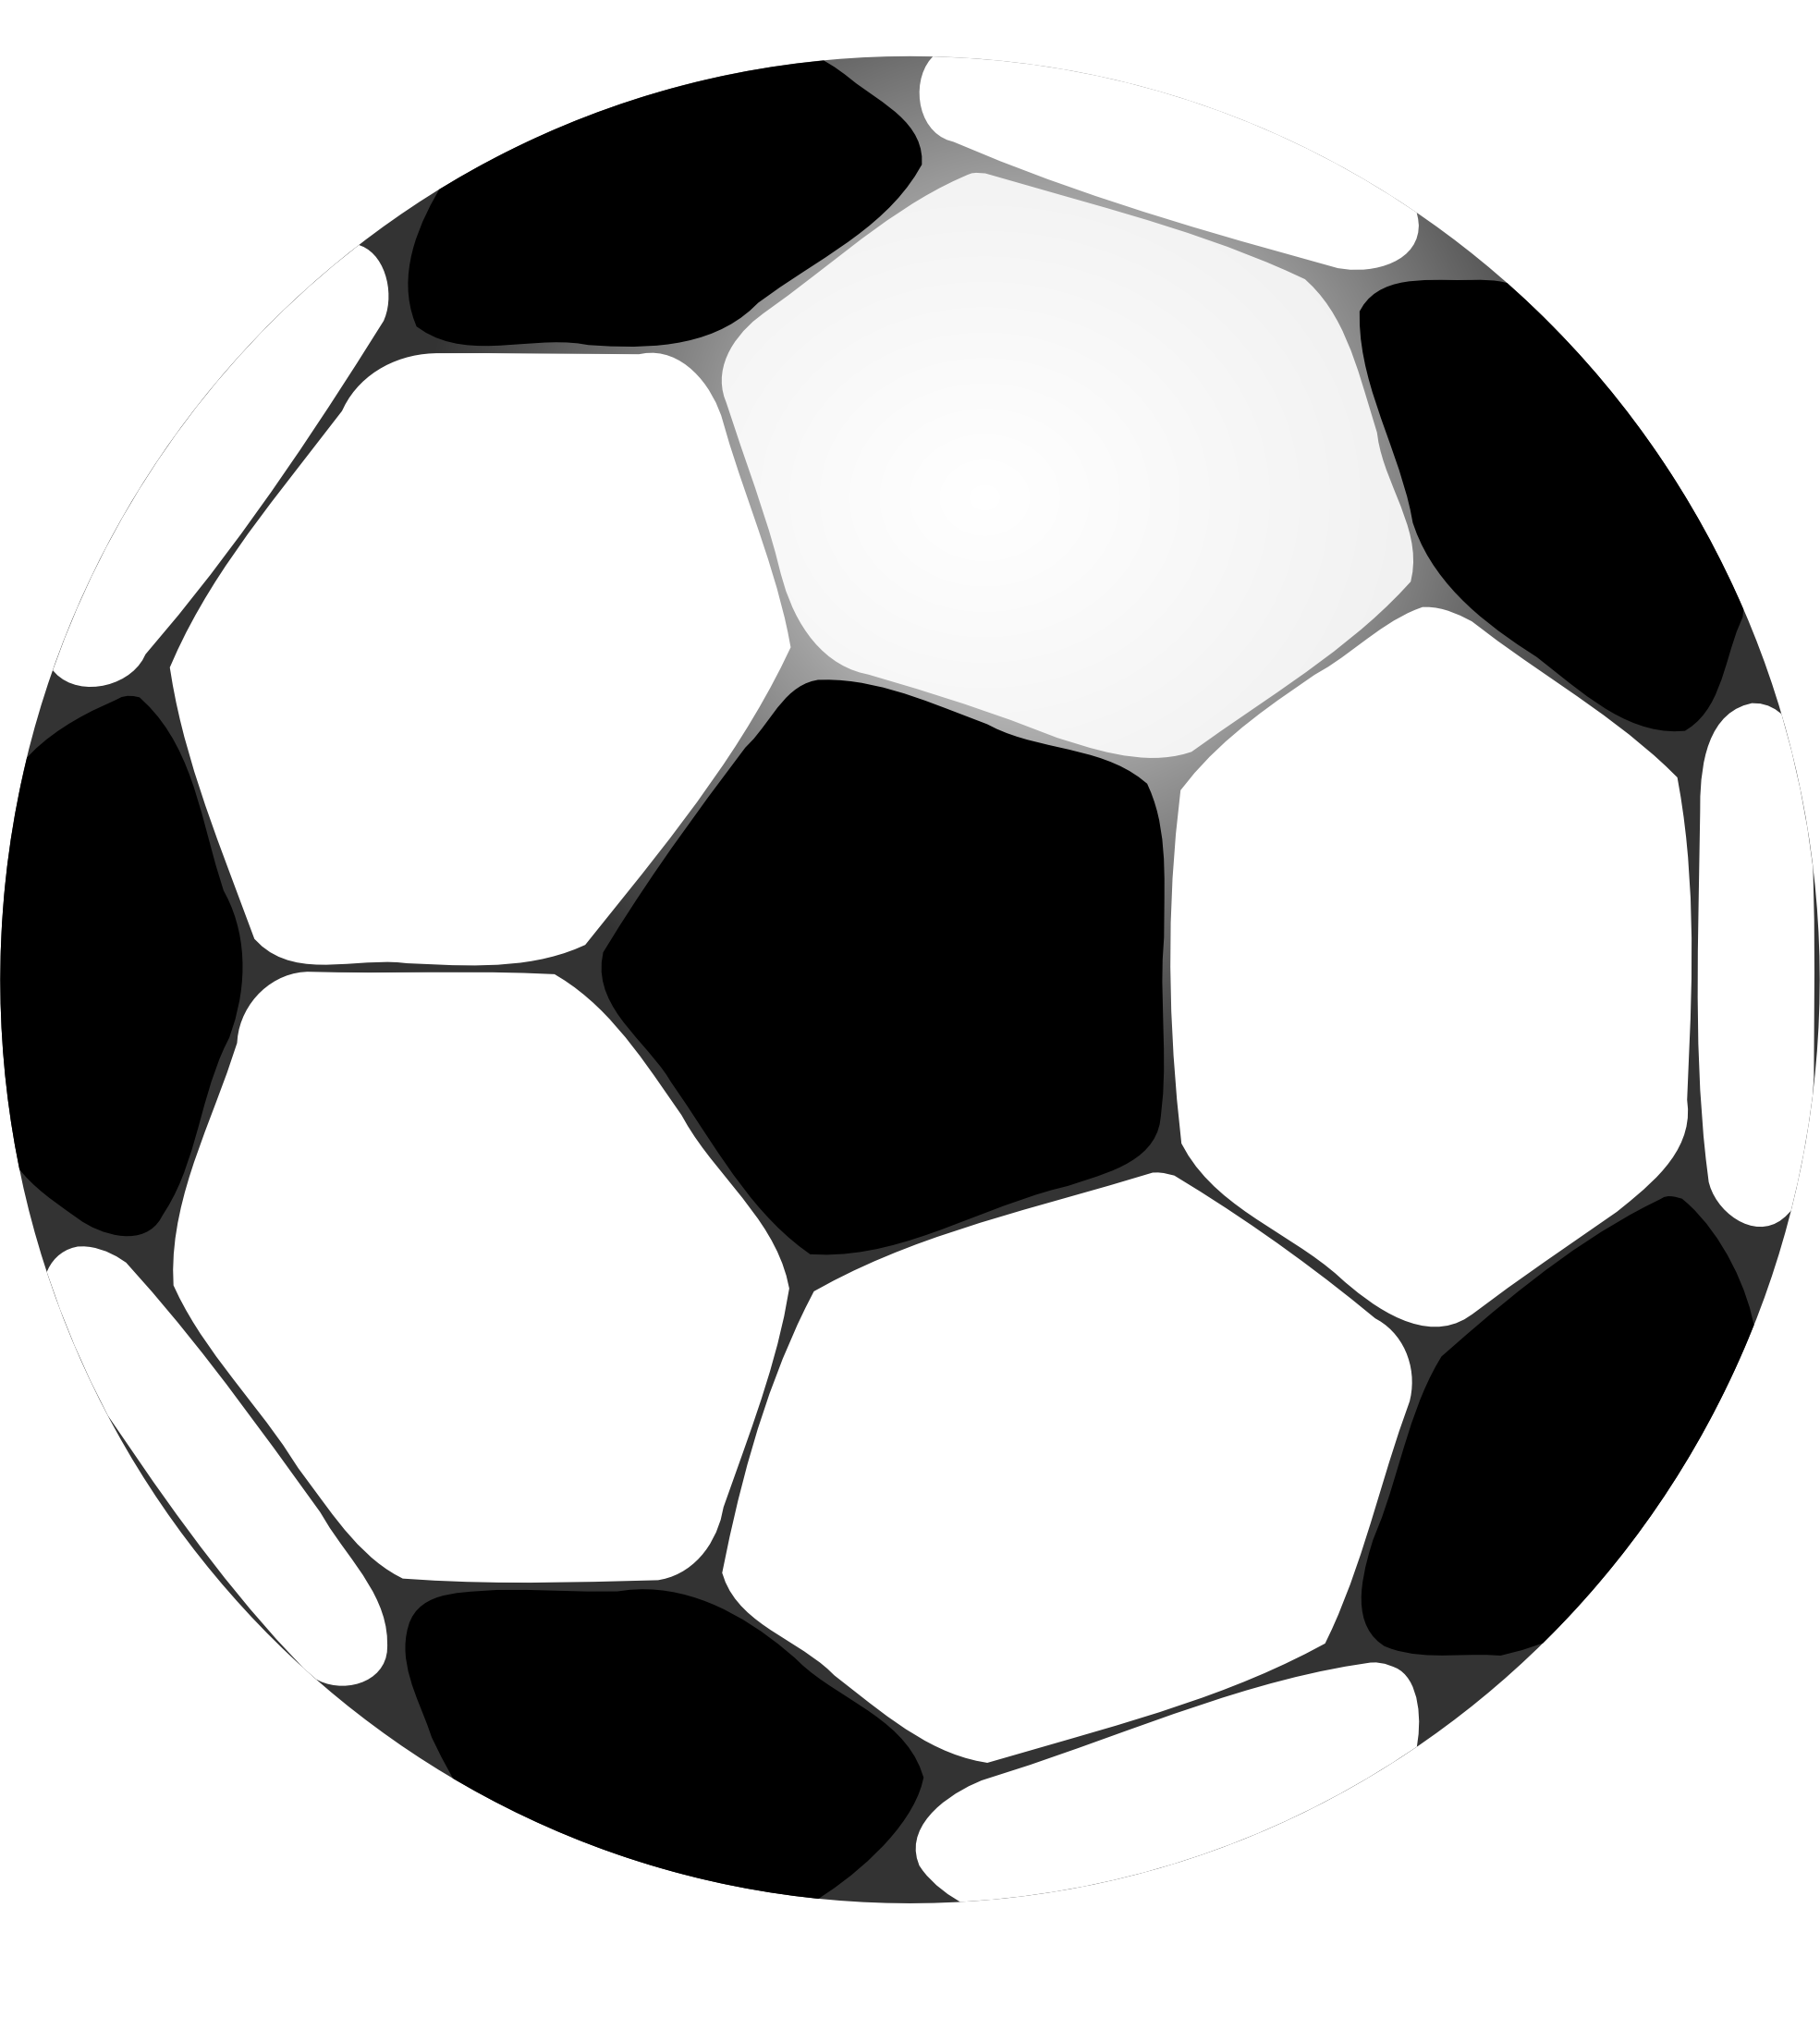 Image Of Soccer Ball - Clipart library